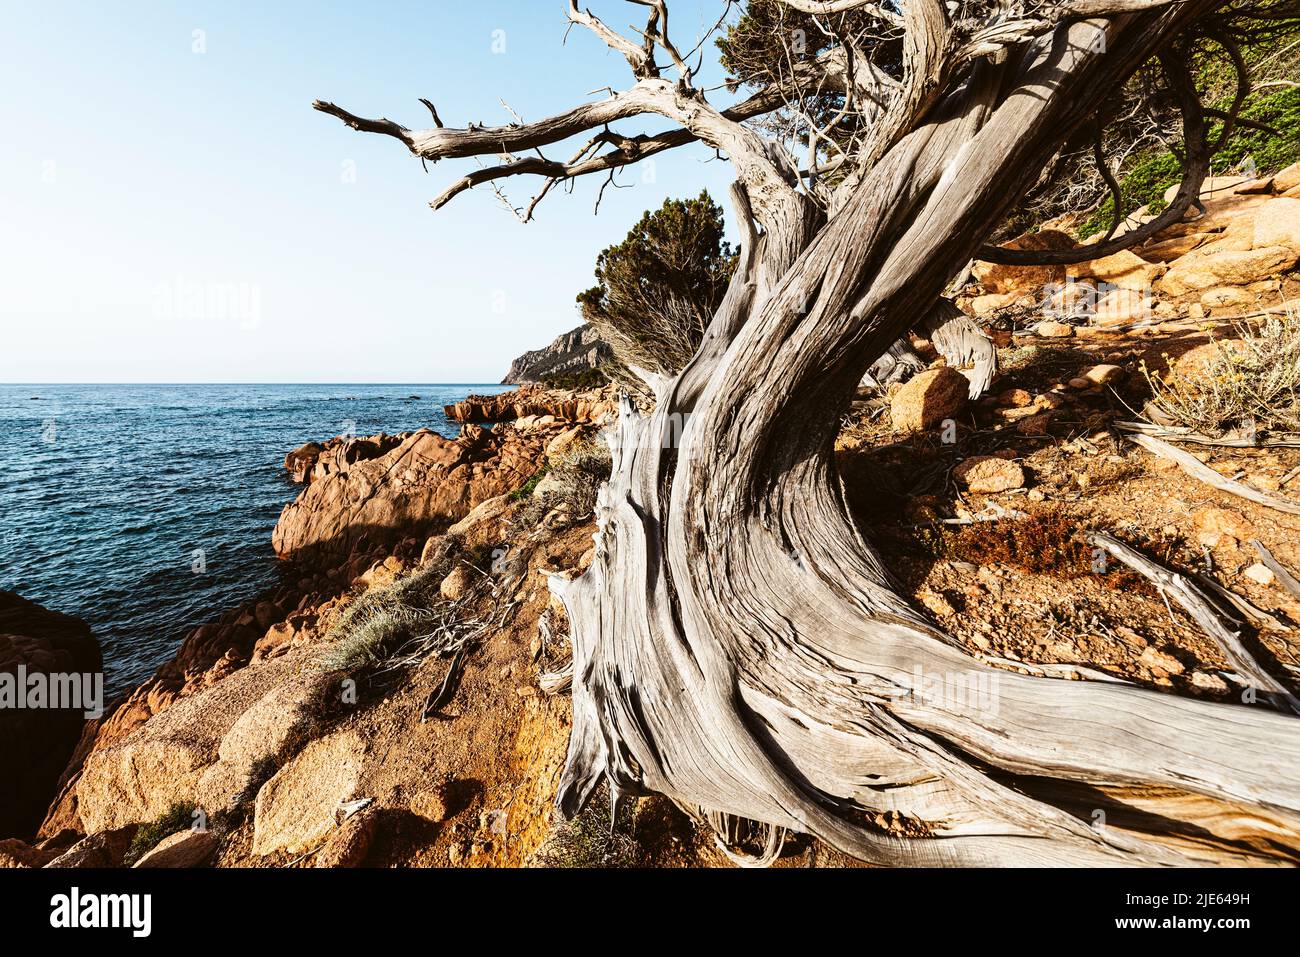 Wind-bent crooked juniper tree on the red porphyry rocks at Coccorocci Bay on the east coast of Sardinia, Ogliastra, Italy Stock Photo